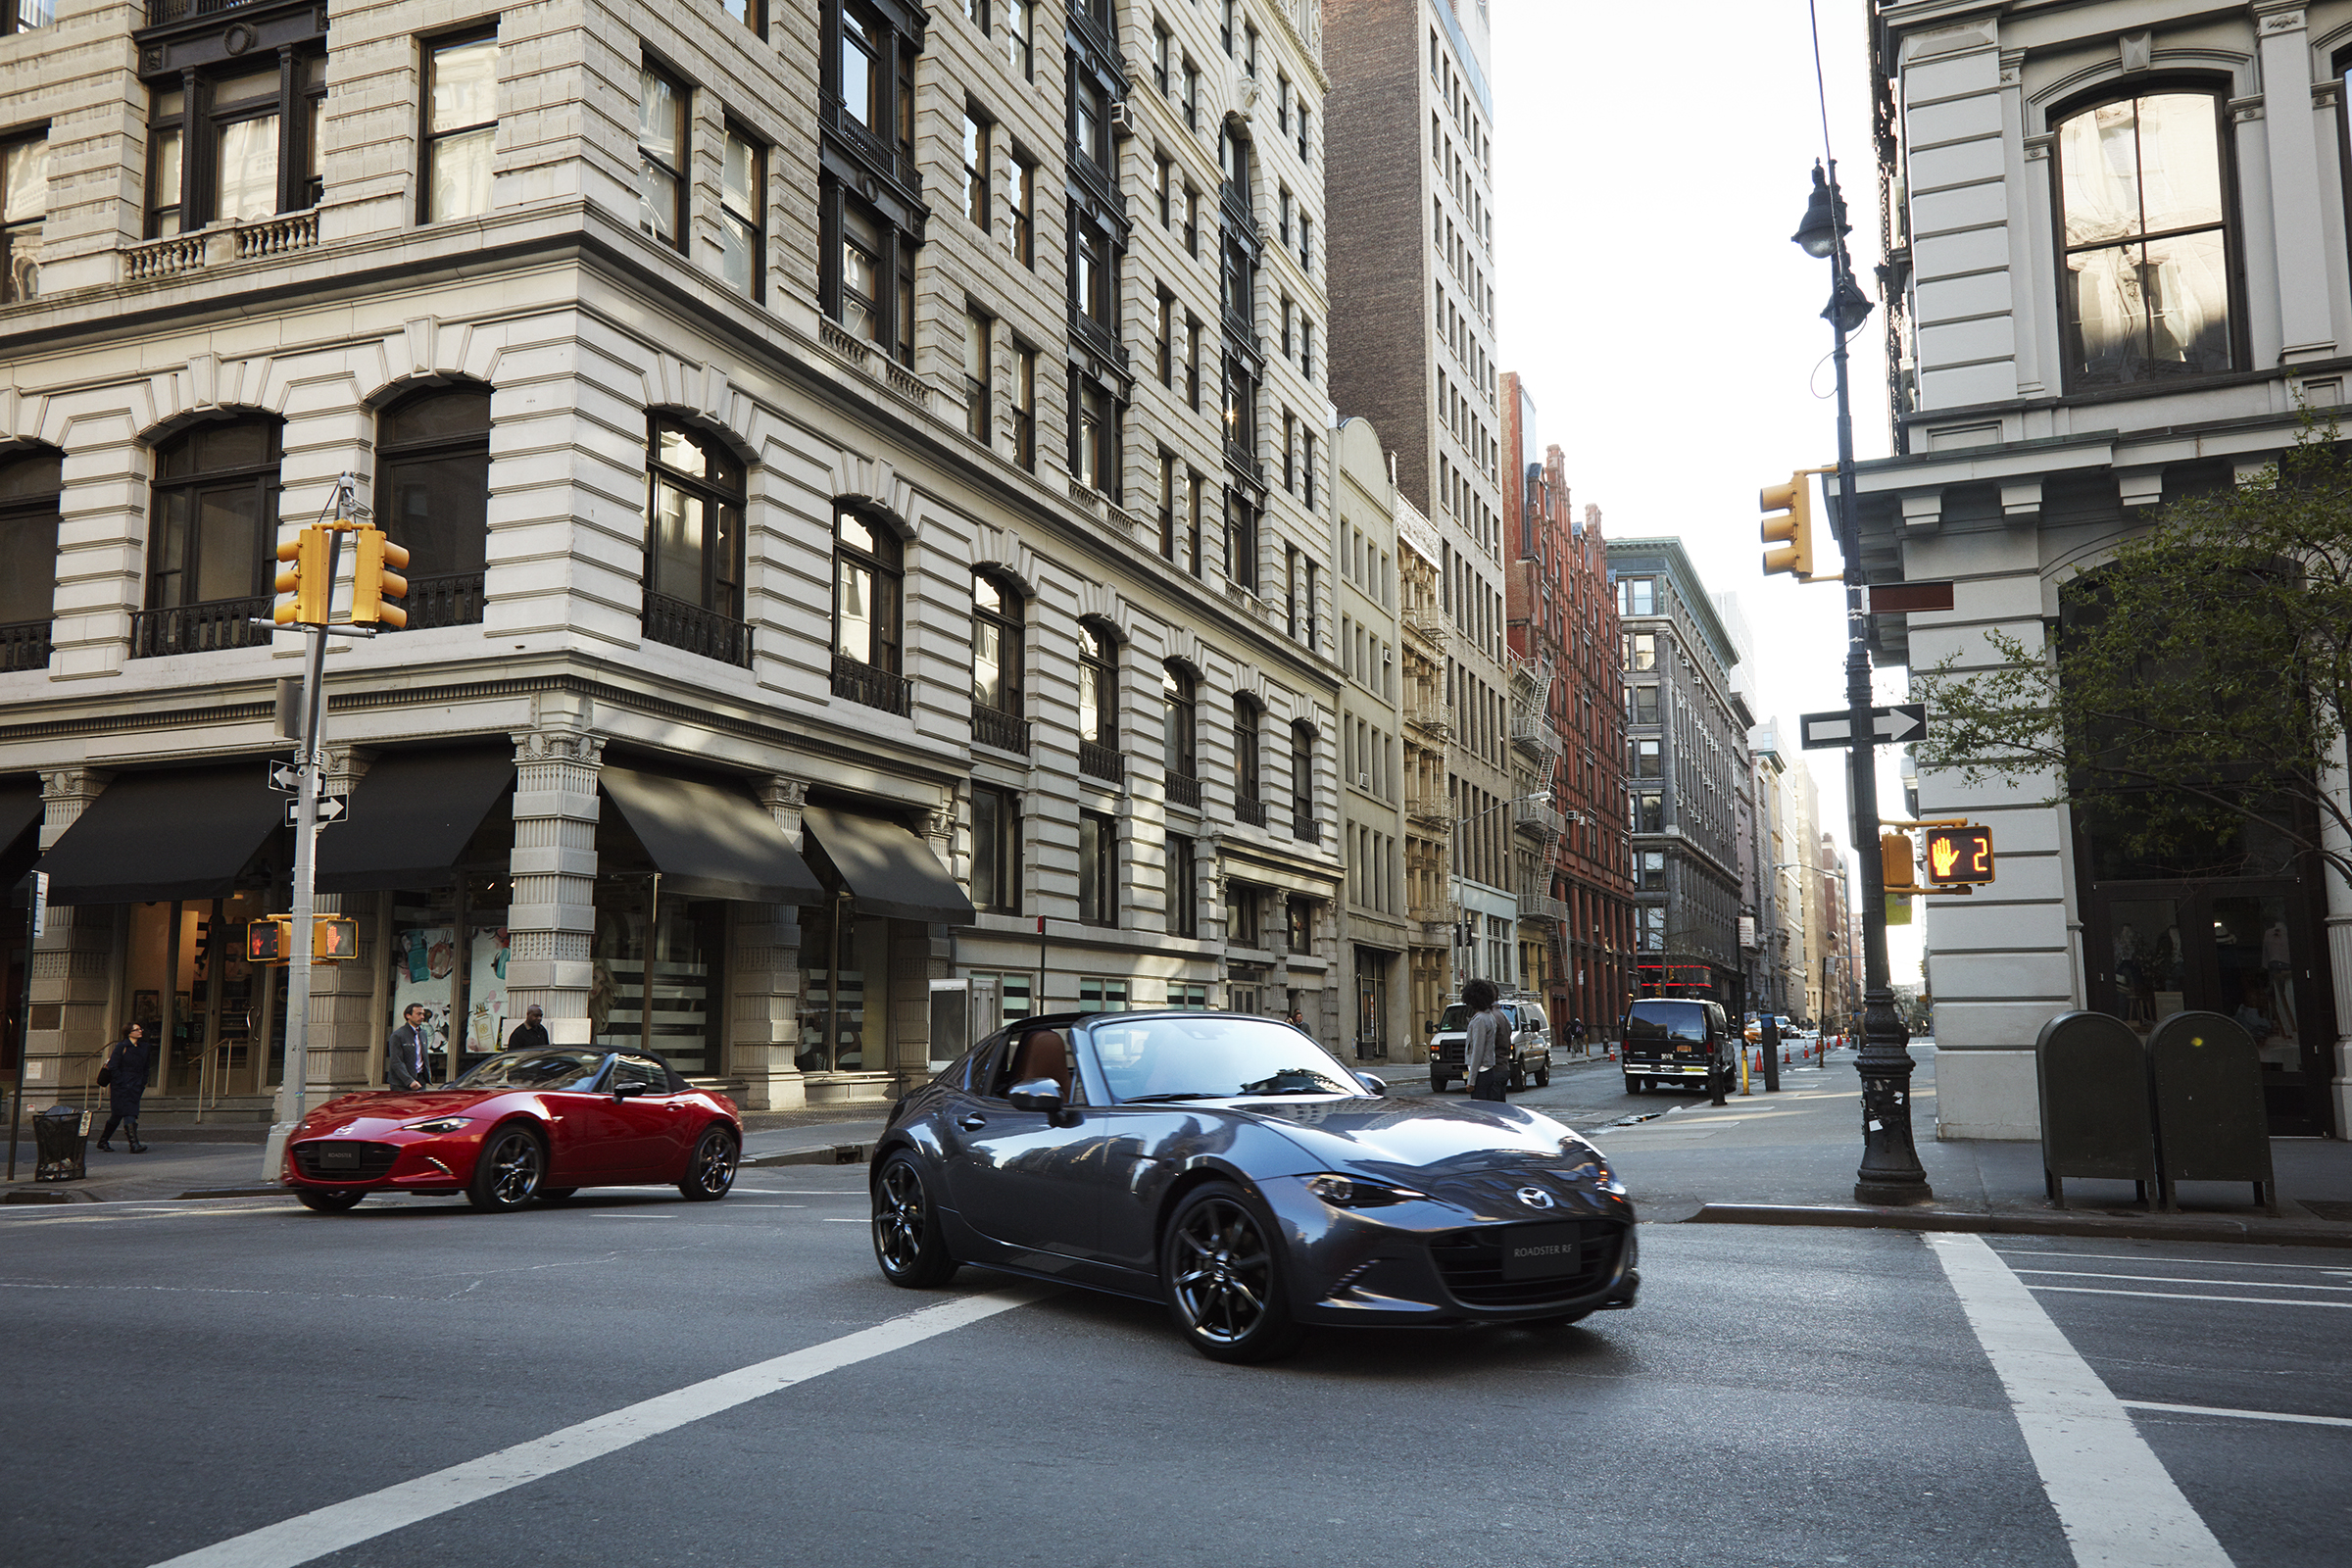 A pair of Mazda Miata sports cars shot from the 3/4 angle on a city street